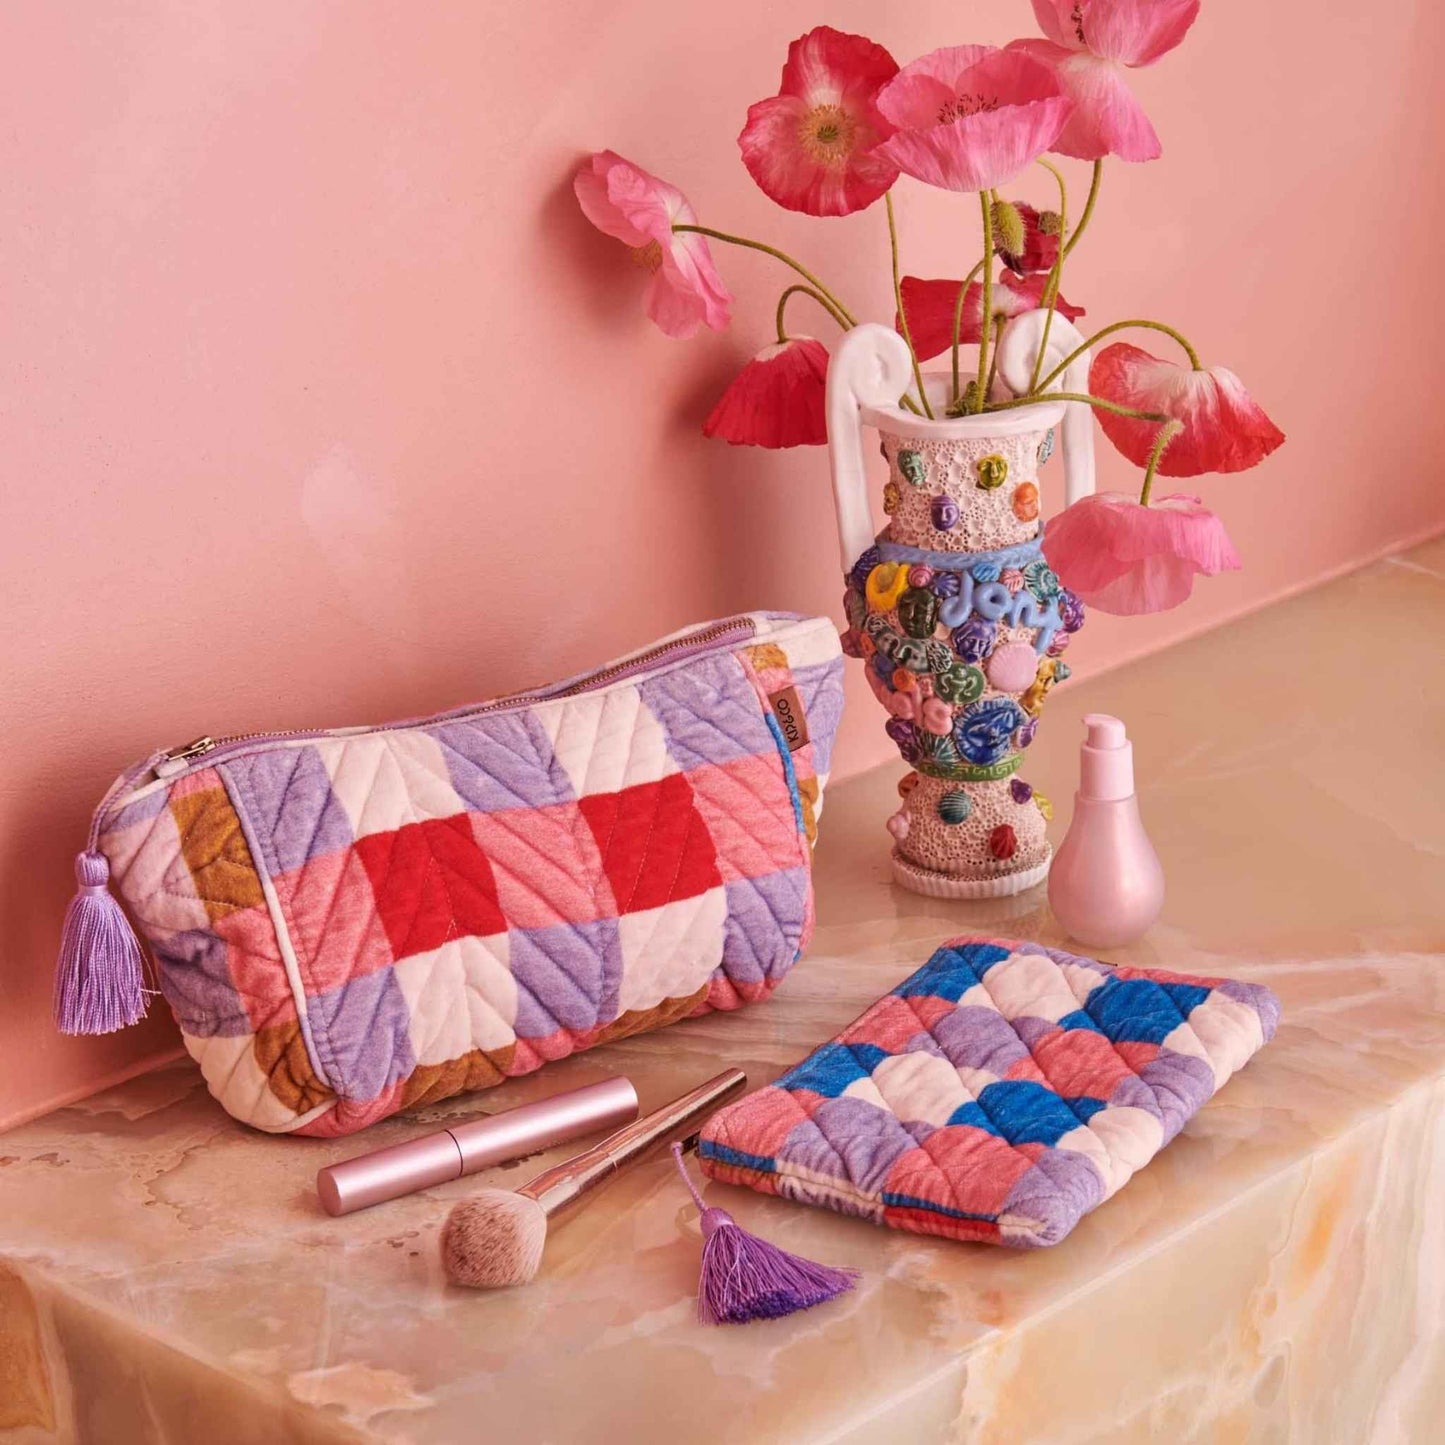 The Summer Check Velvet Toiletry Bag features printed quilted velvet with a check pattern of pink, purple, blue, red, mustard brown and white with feature purple zip tassel.